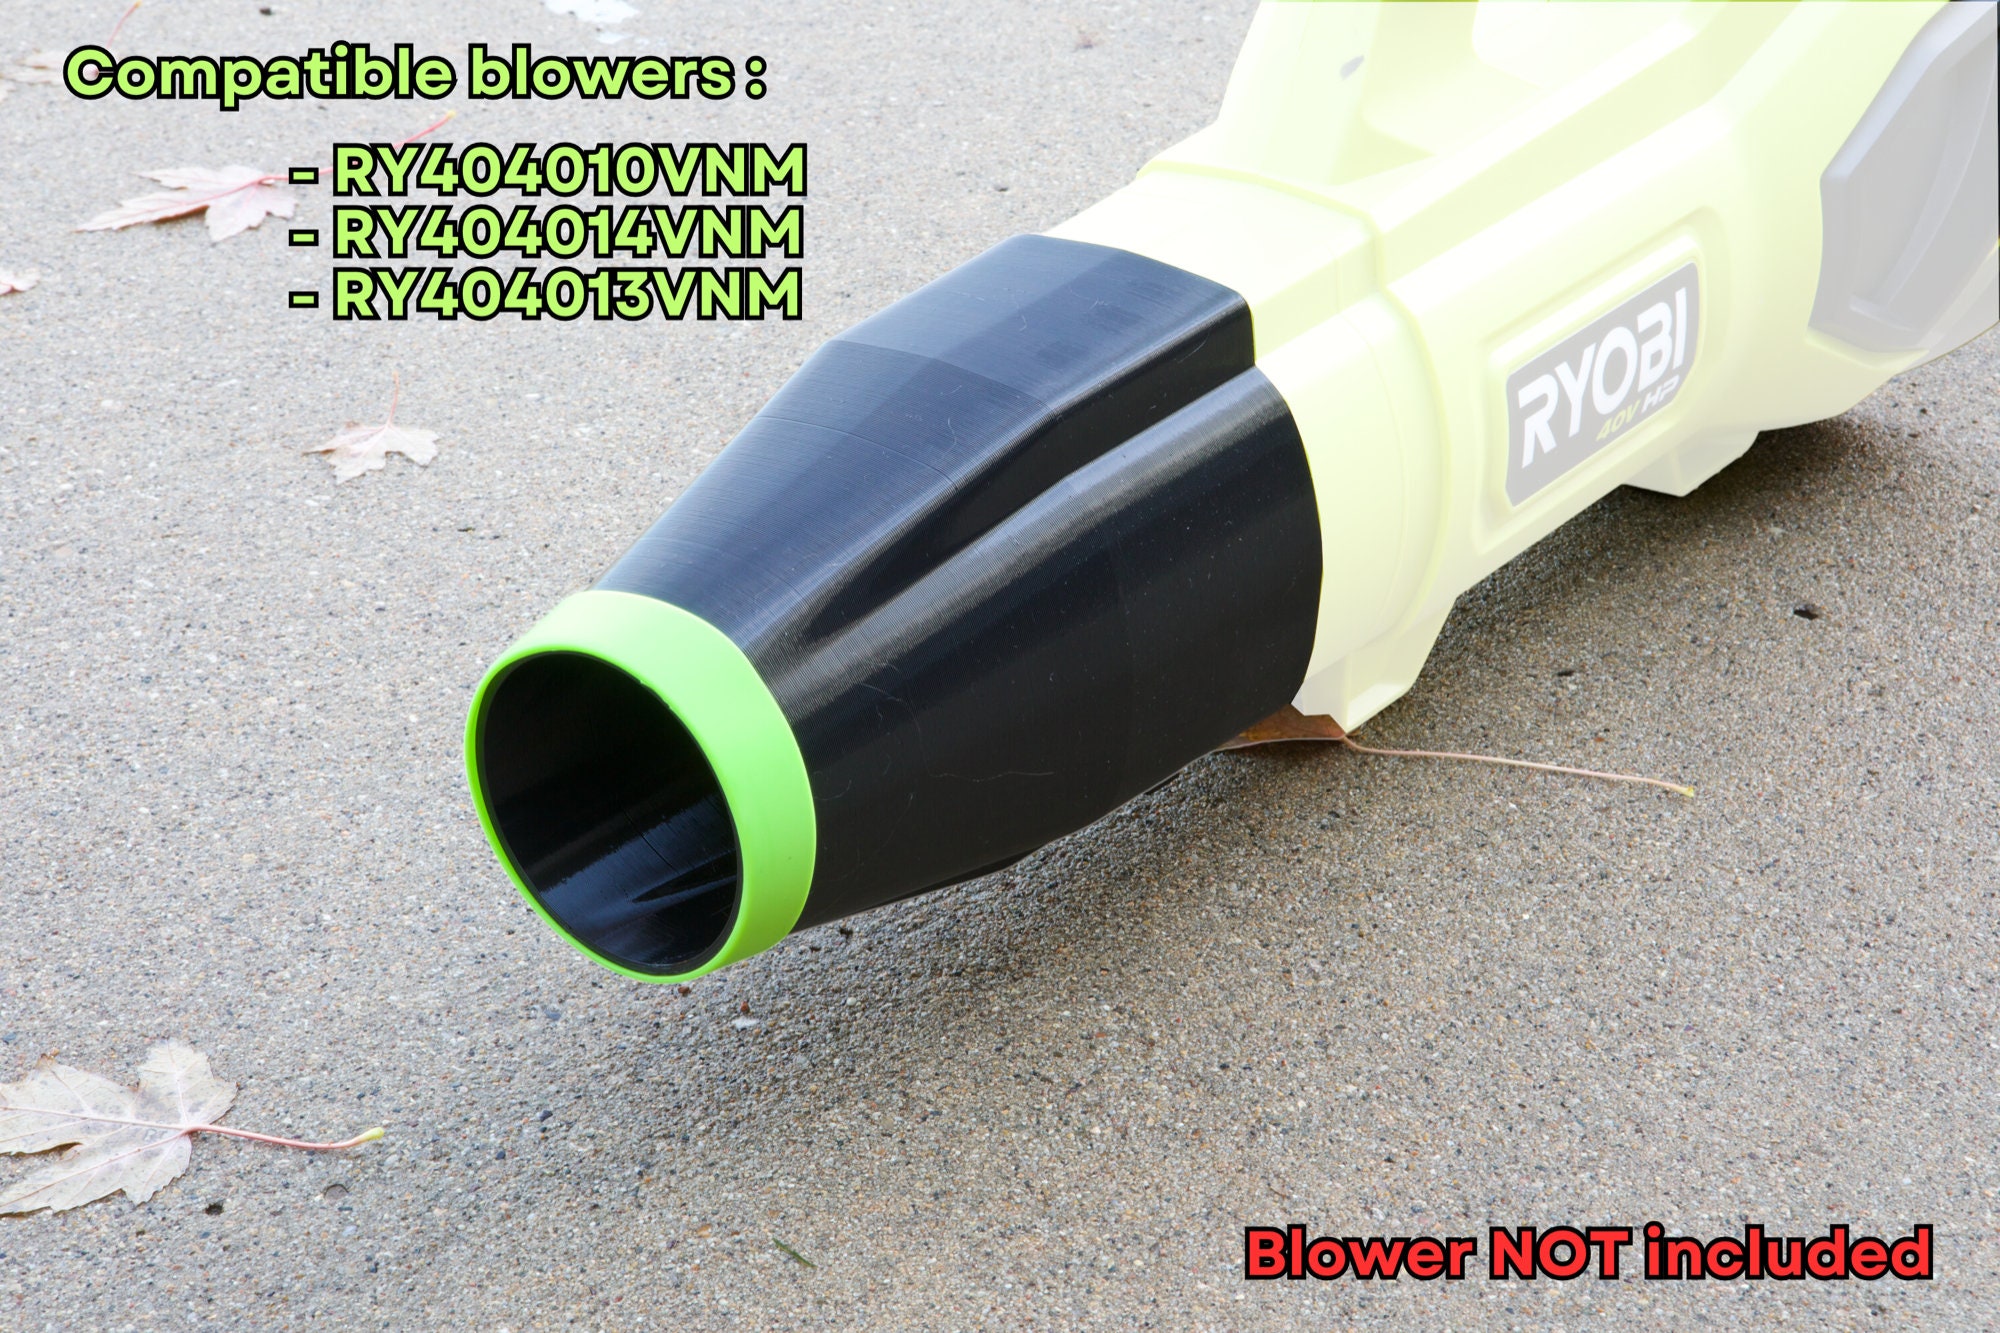 Secure 3D Wall Mount for Ryobi P21012 HP Brushless Leaf Blower